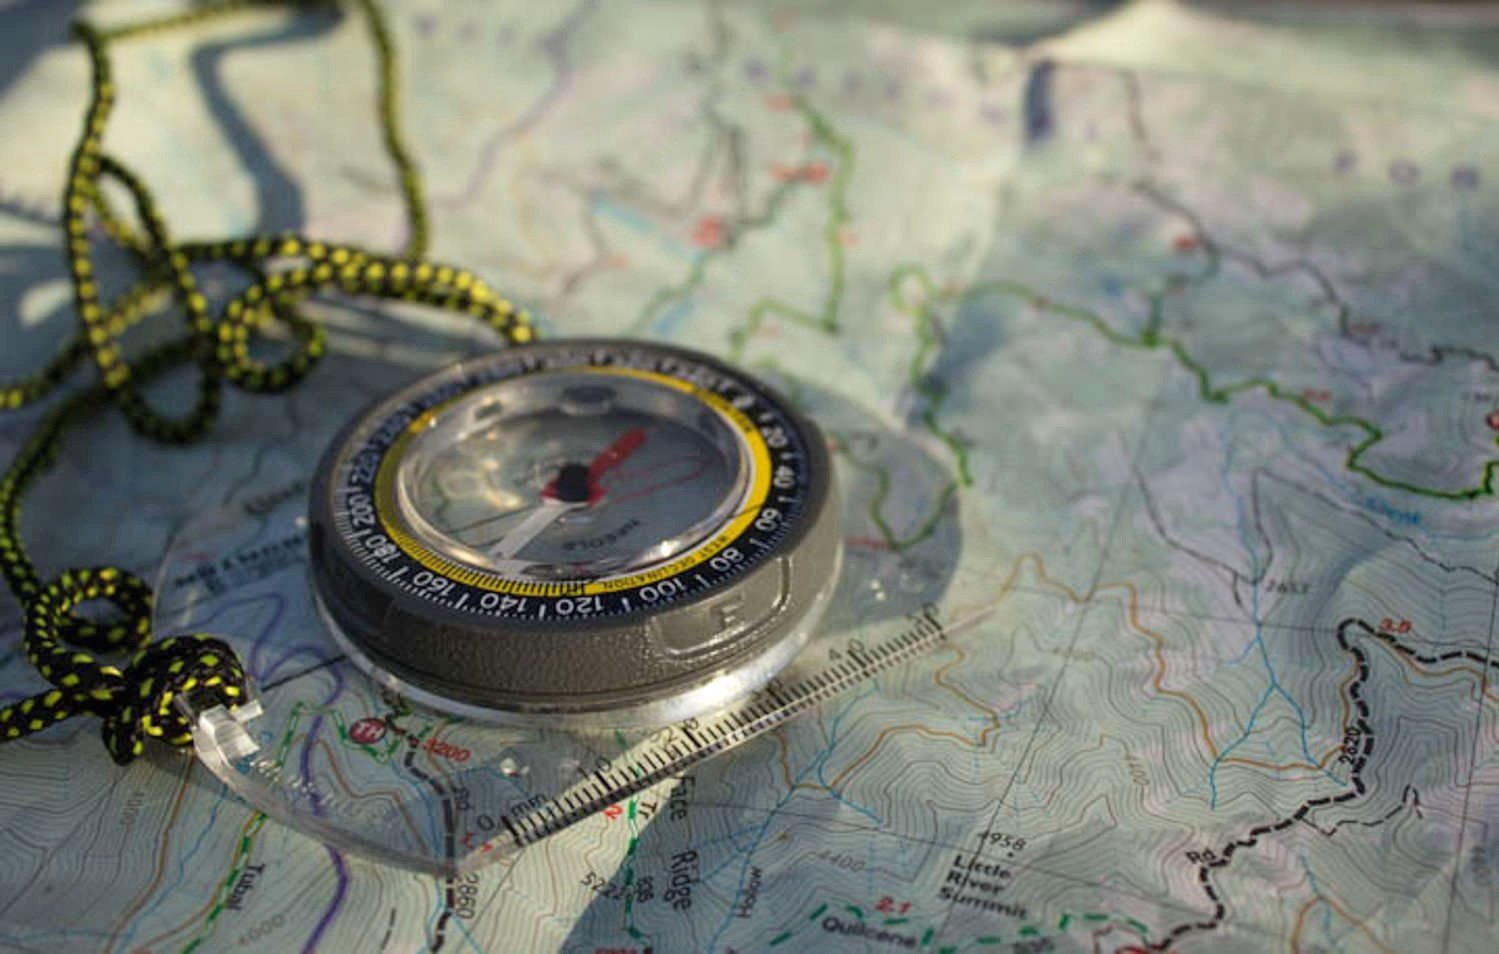 Closeup of a map and compass